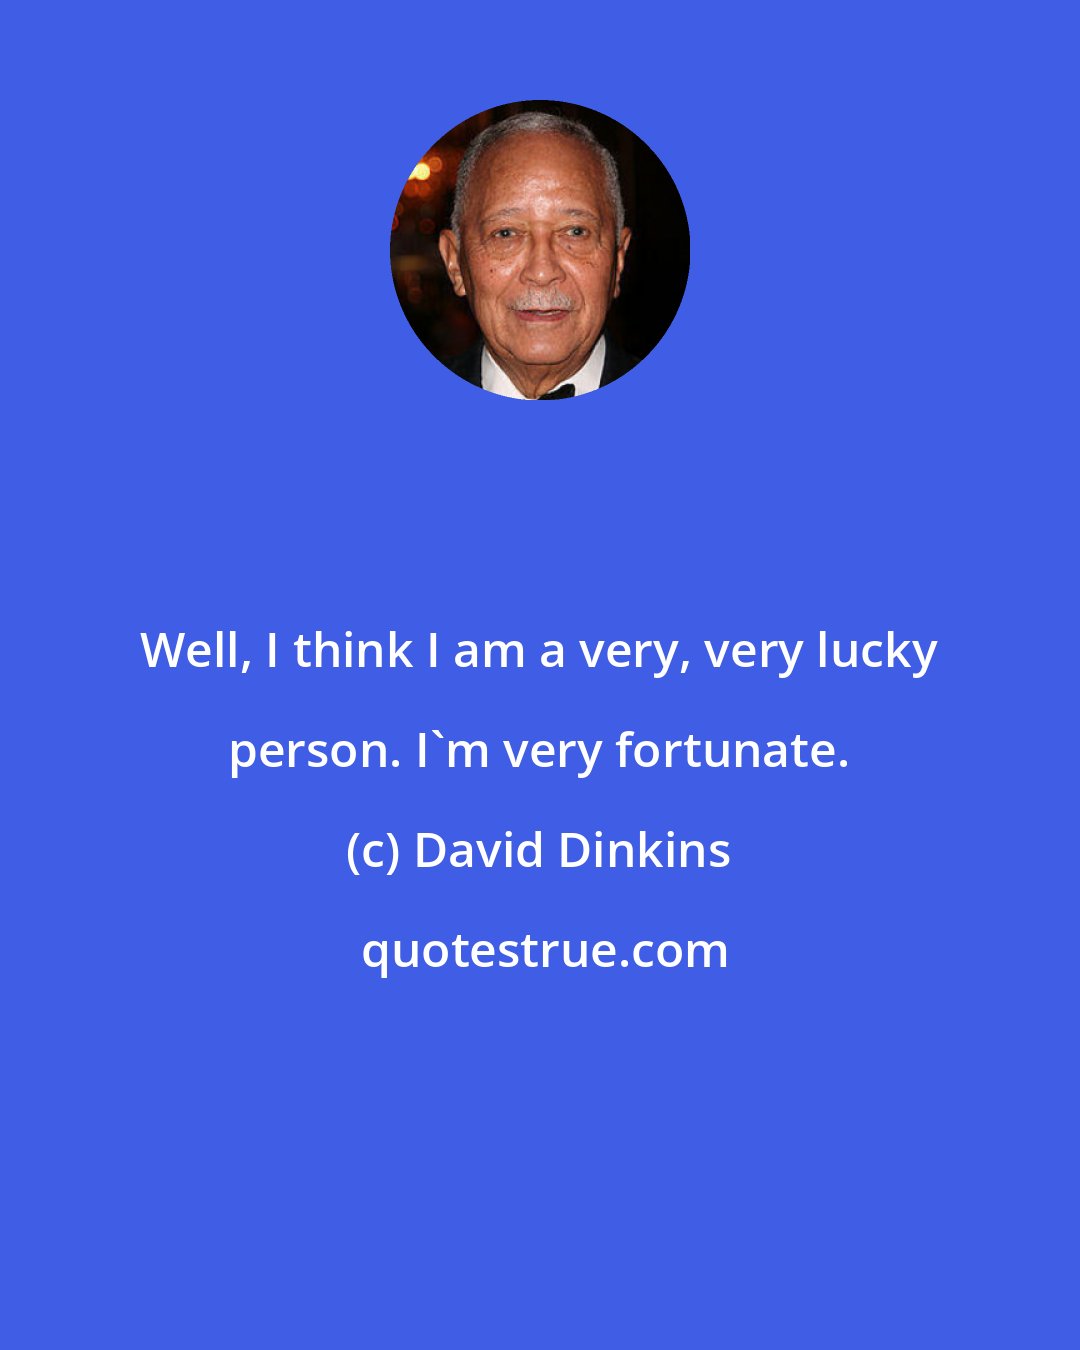 David Dinkins: Well, I think I am a very, very lucky person. I'm very fortunate.